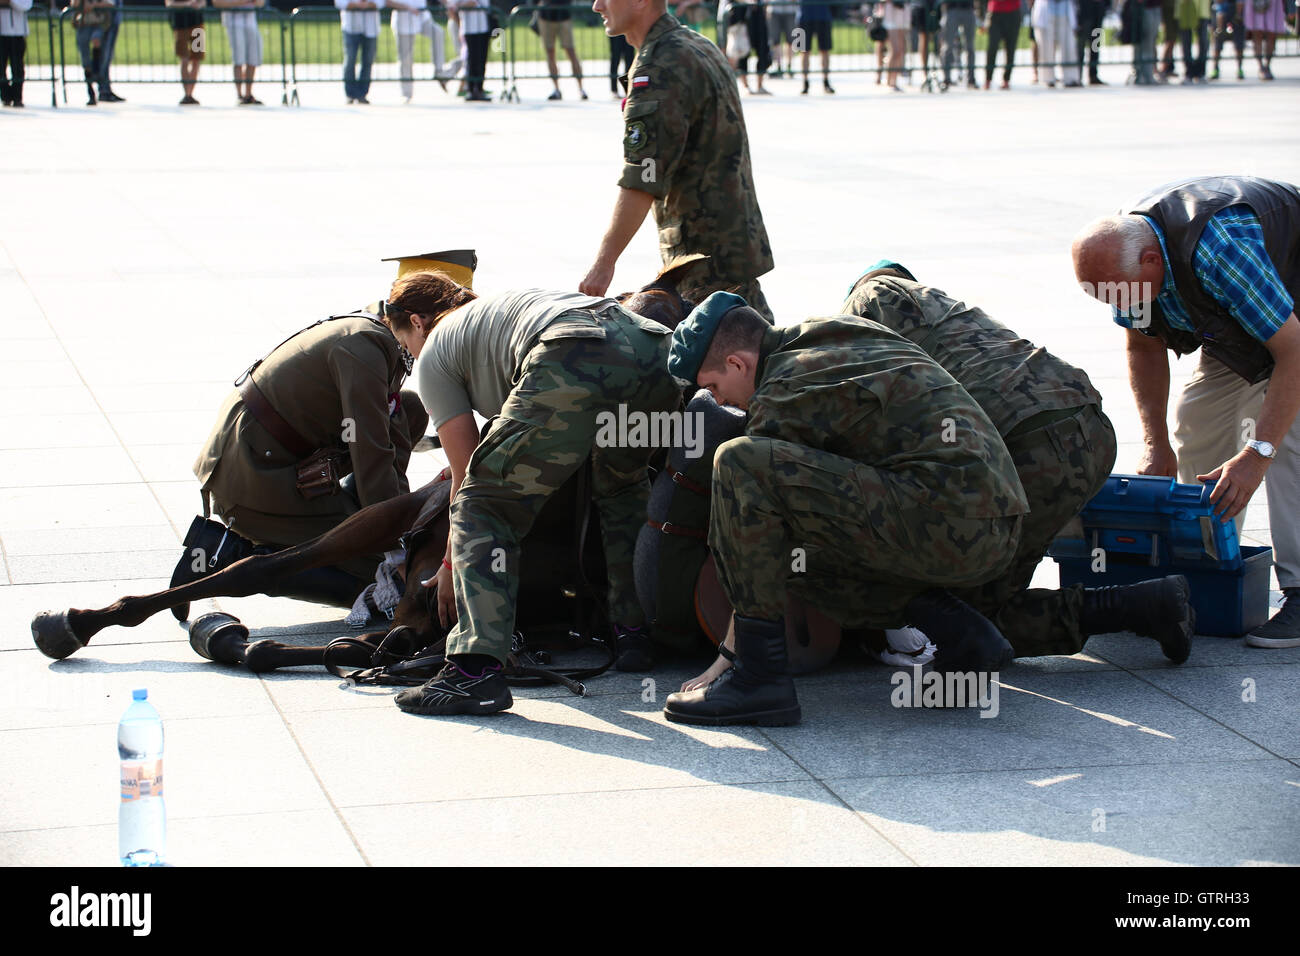 Poland, Warsaw, 10th September 2016: Garrison of Warsaw held cavalry celebration day of the Polish army. A horse collapsed of the hot temperature during the riding parade. Credit:  Jake Ratz/Alamy Live News Stock Photo